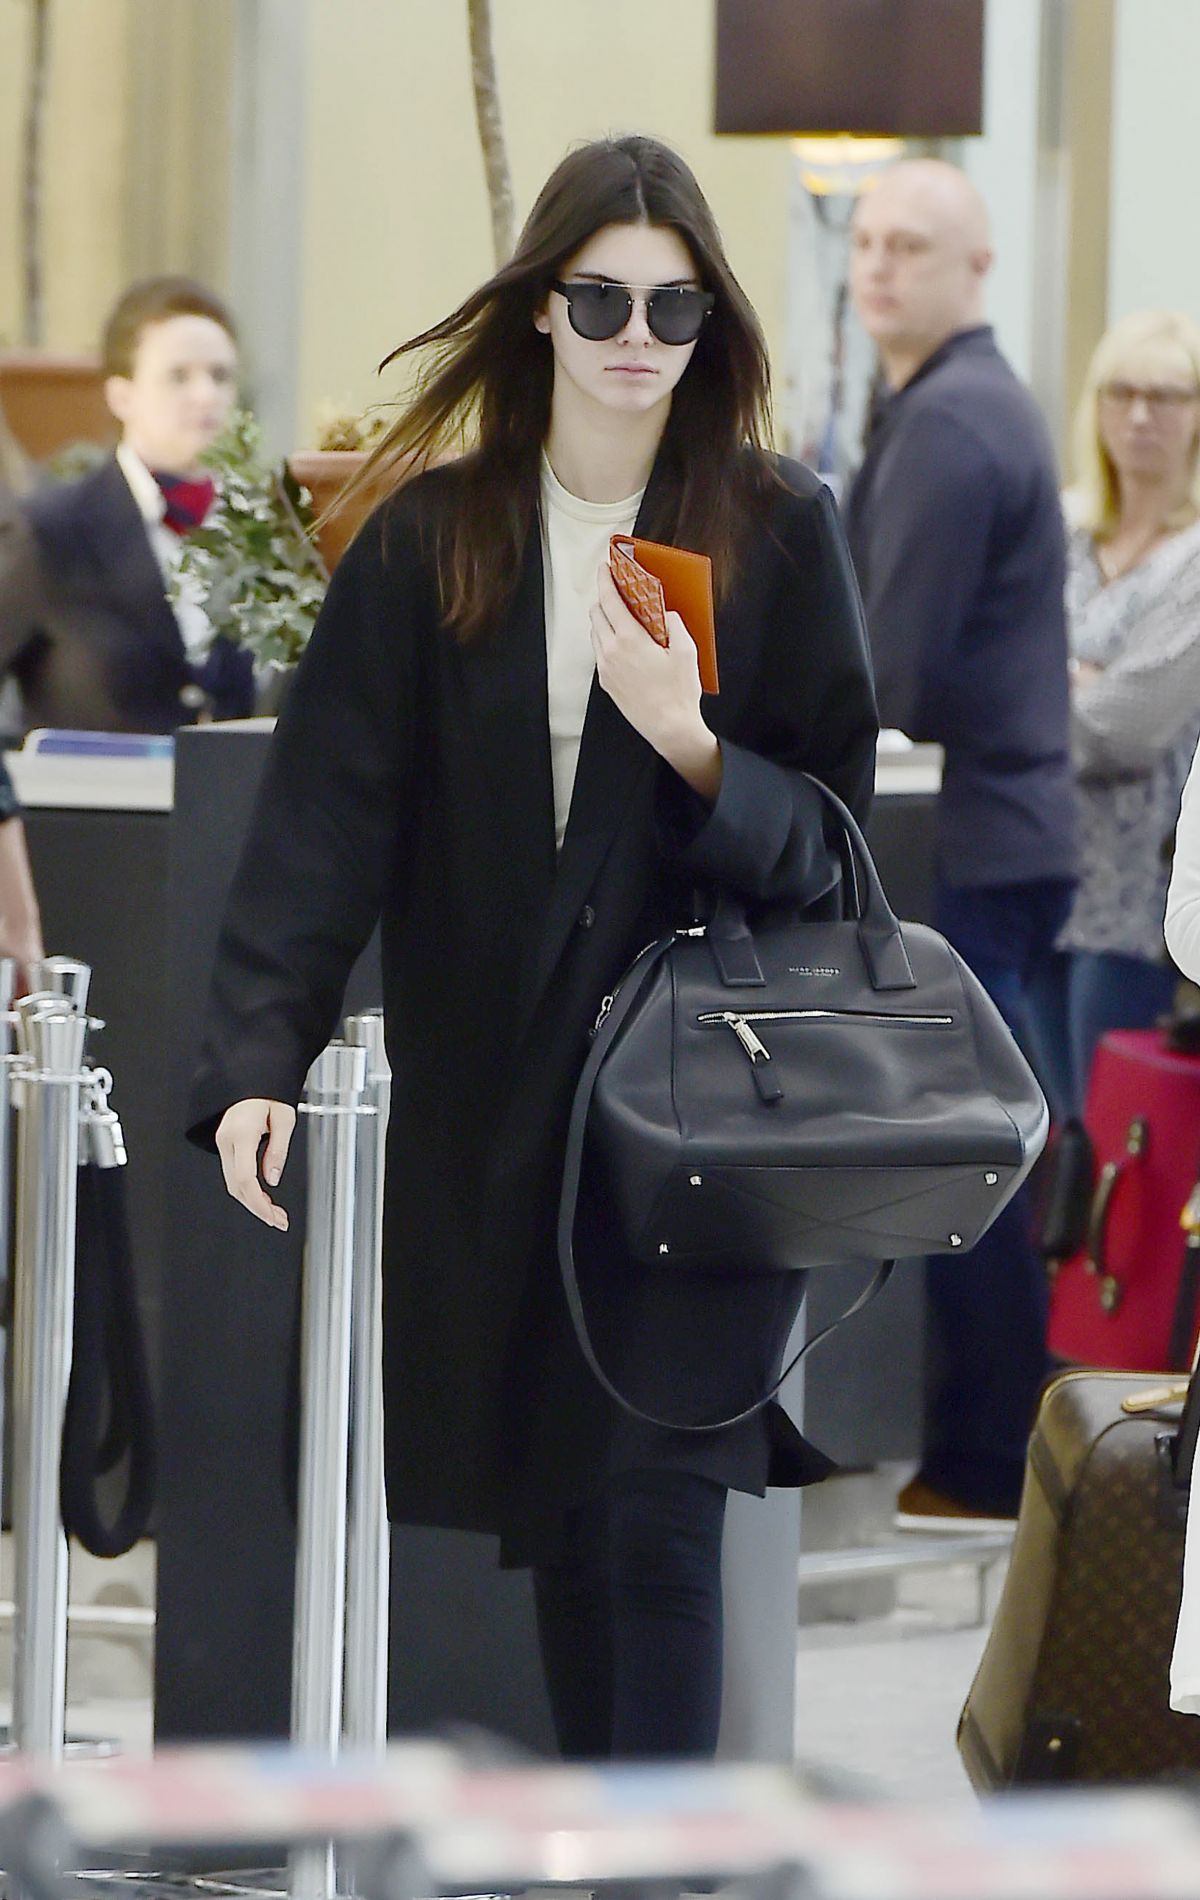 KENDALL JENNER at Heathrow Airport in London 07/14/2015 – HawtCelebs